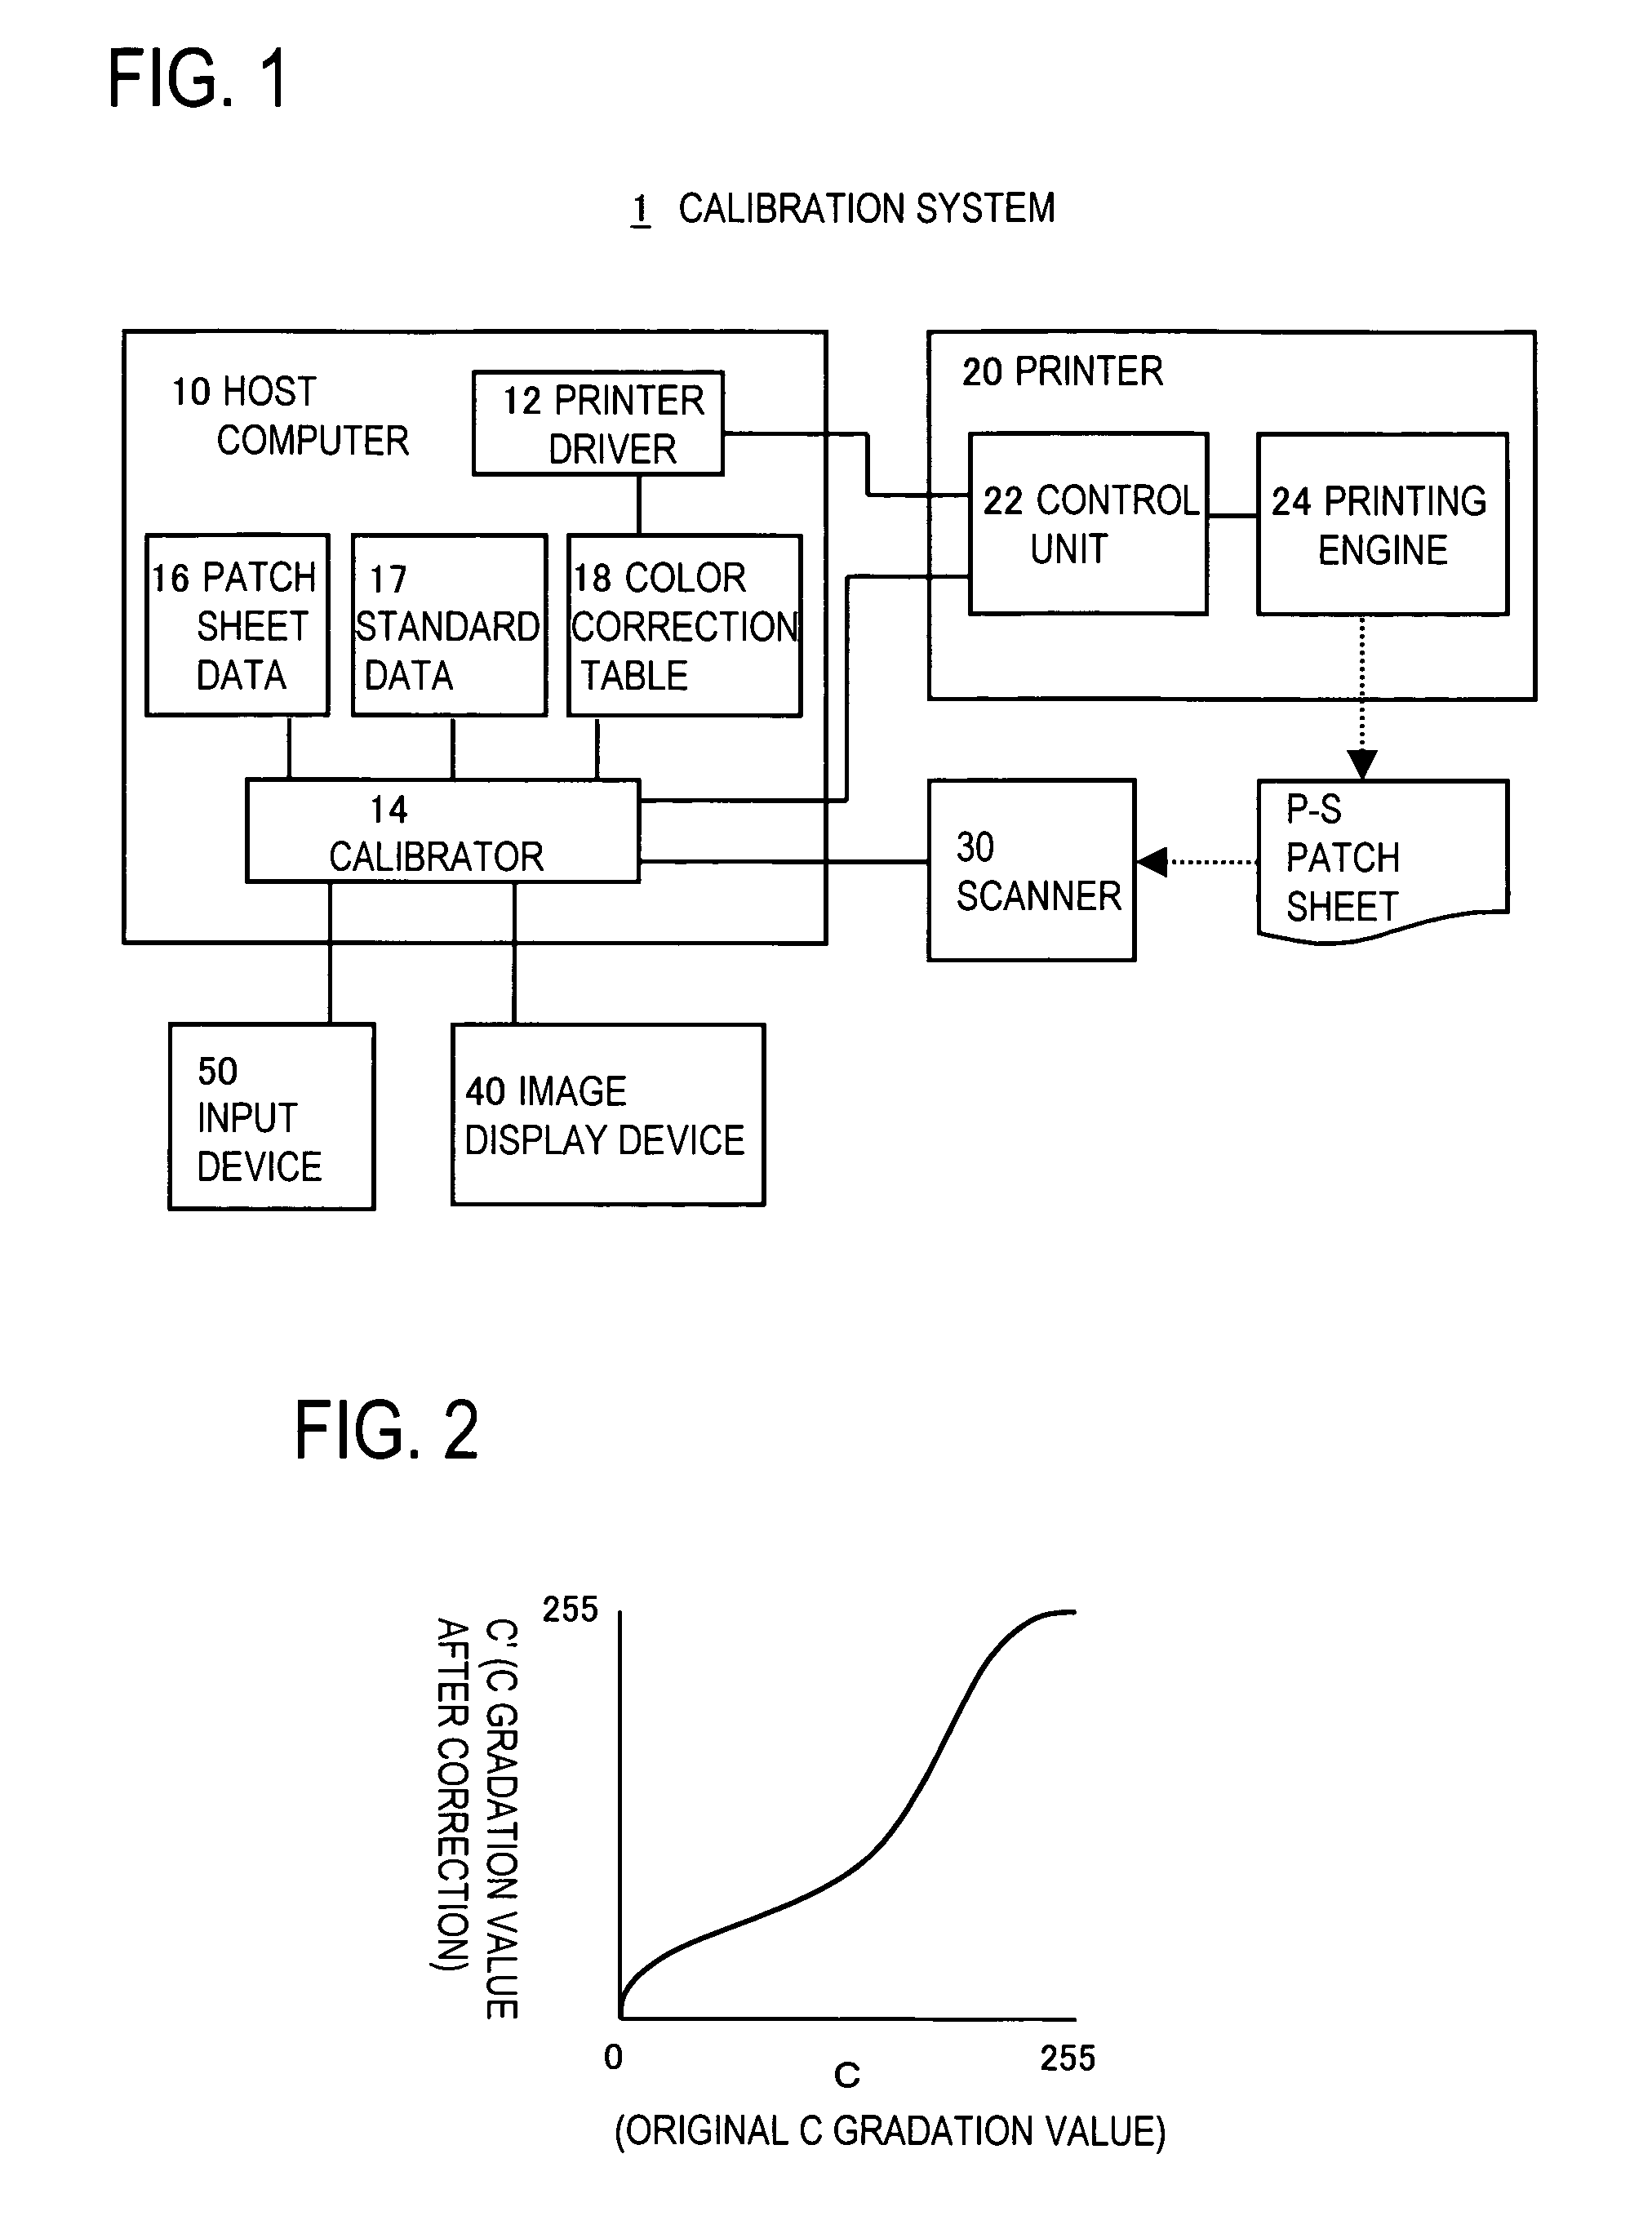 Computer readable medium recording a calibration program, calibration method, and calibration system for detecting patch positions during acquisition of calorimetric values from a patch sheet